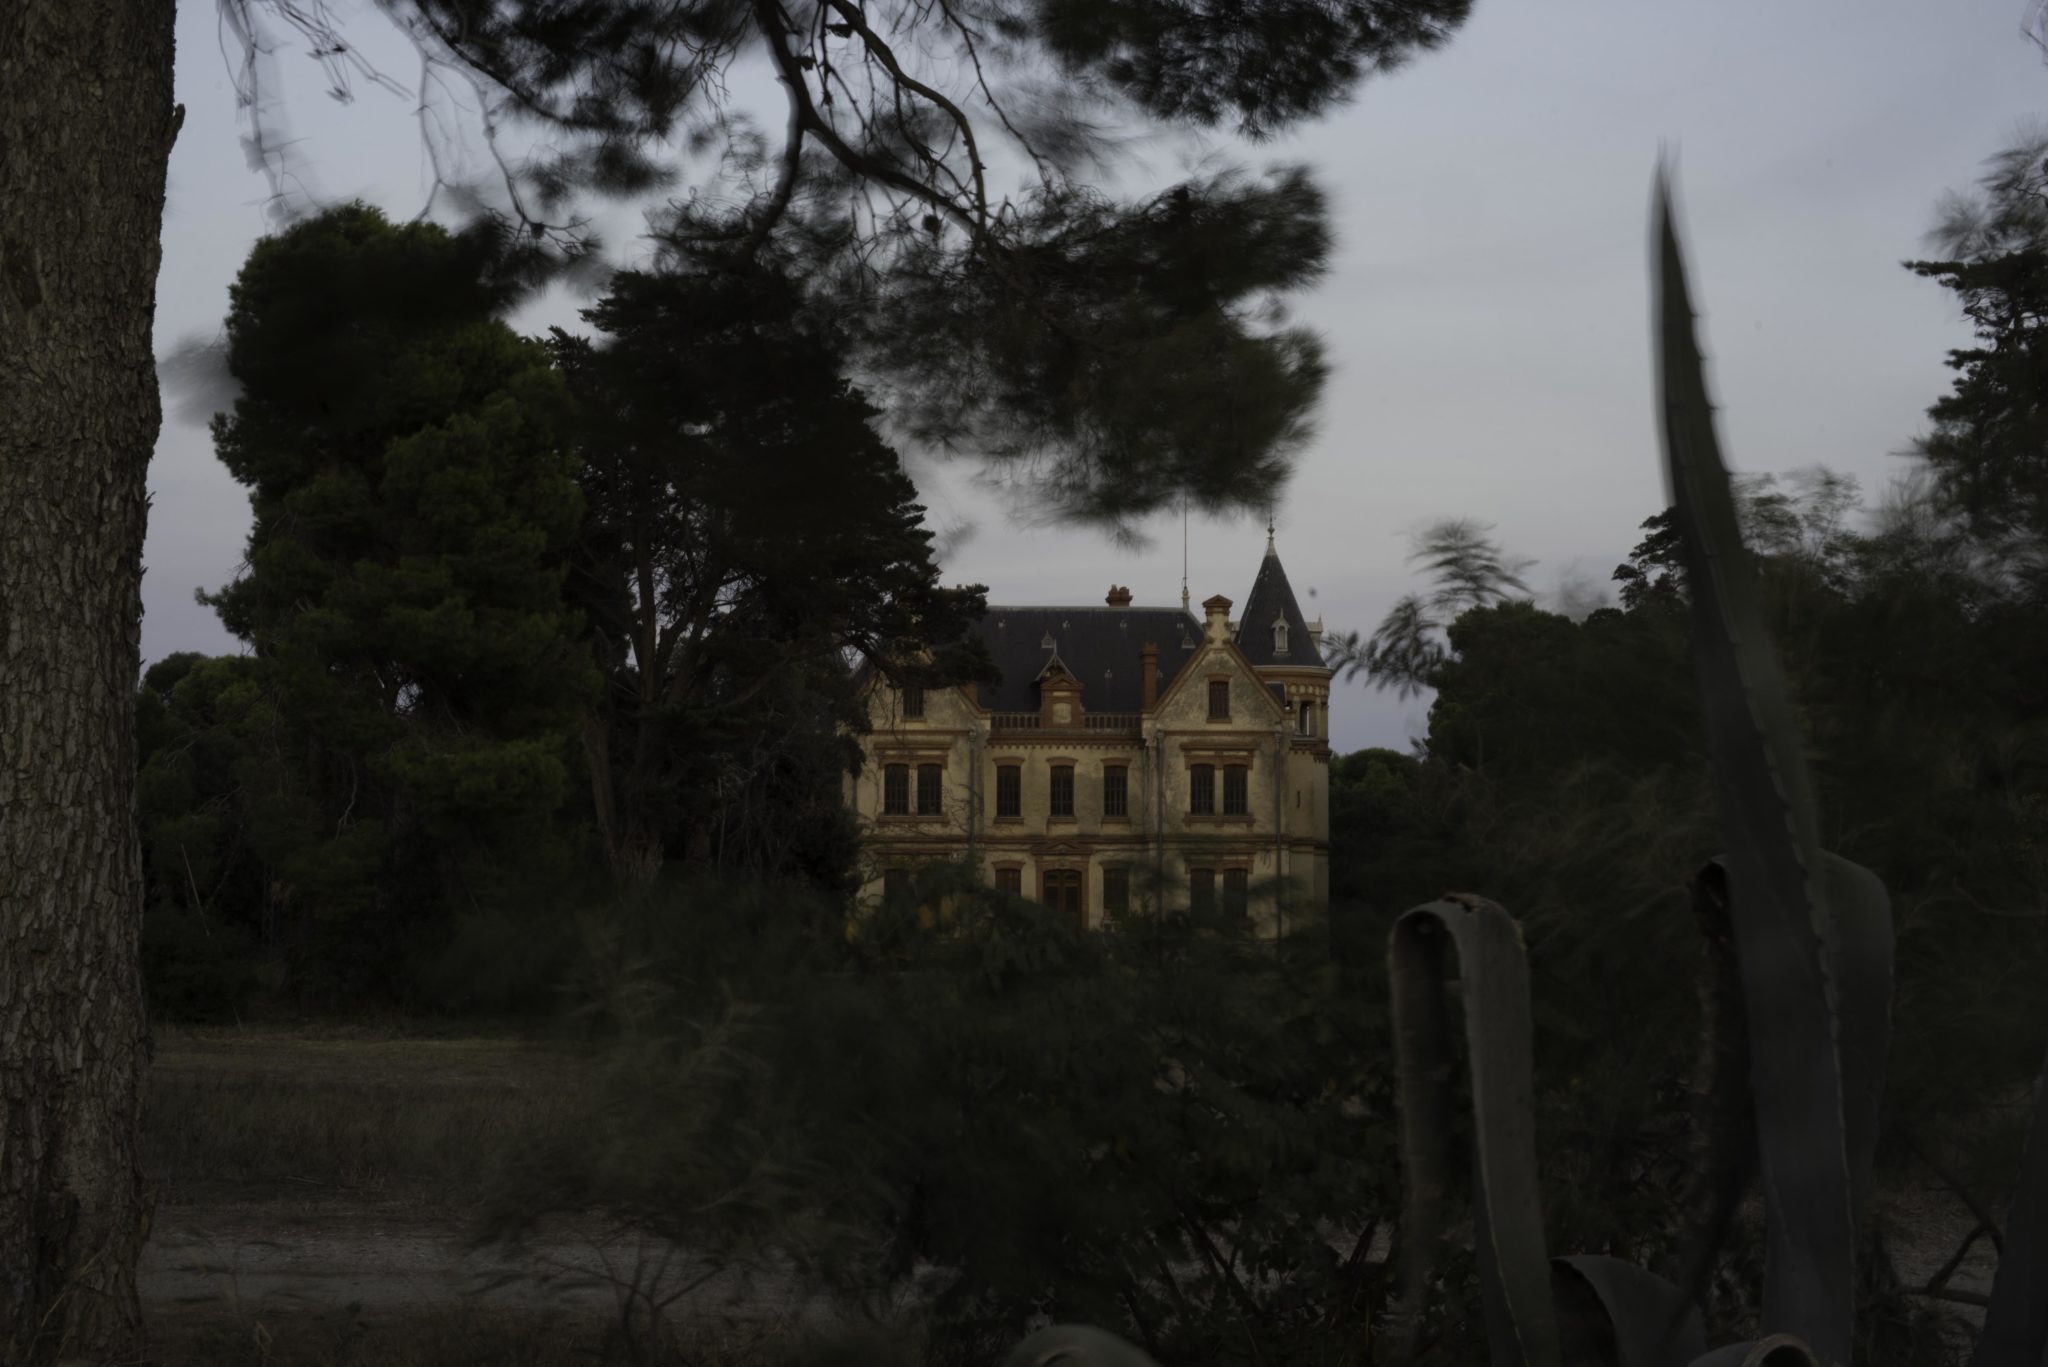 Artist-in-Residence, Rhapsodic Night Landscape Photographs and Exhibition in France, Chateau